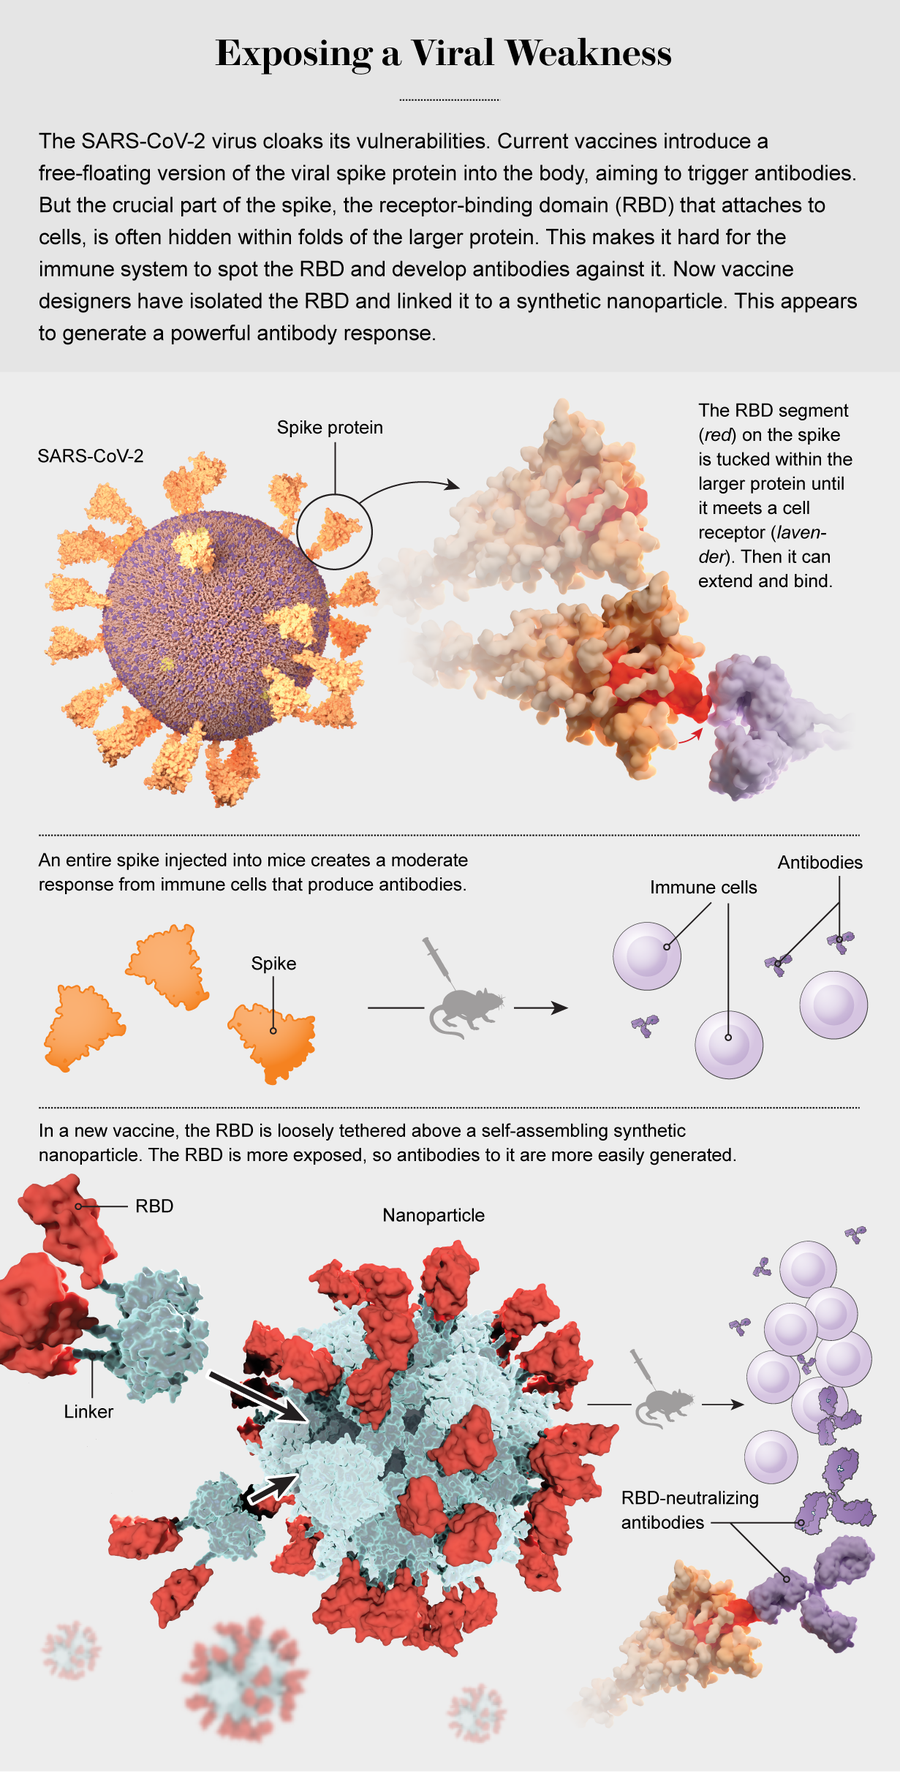 Graphic shows how injecting nanoparticles with SARS-CoV-2 RBD segments attached can generate antibodies in mice.